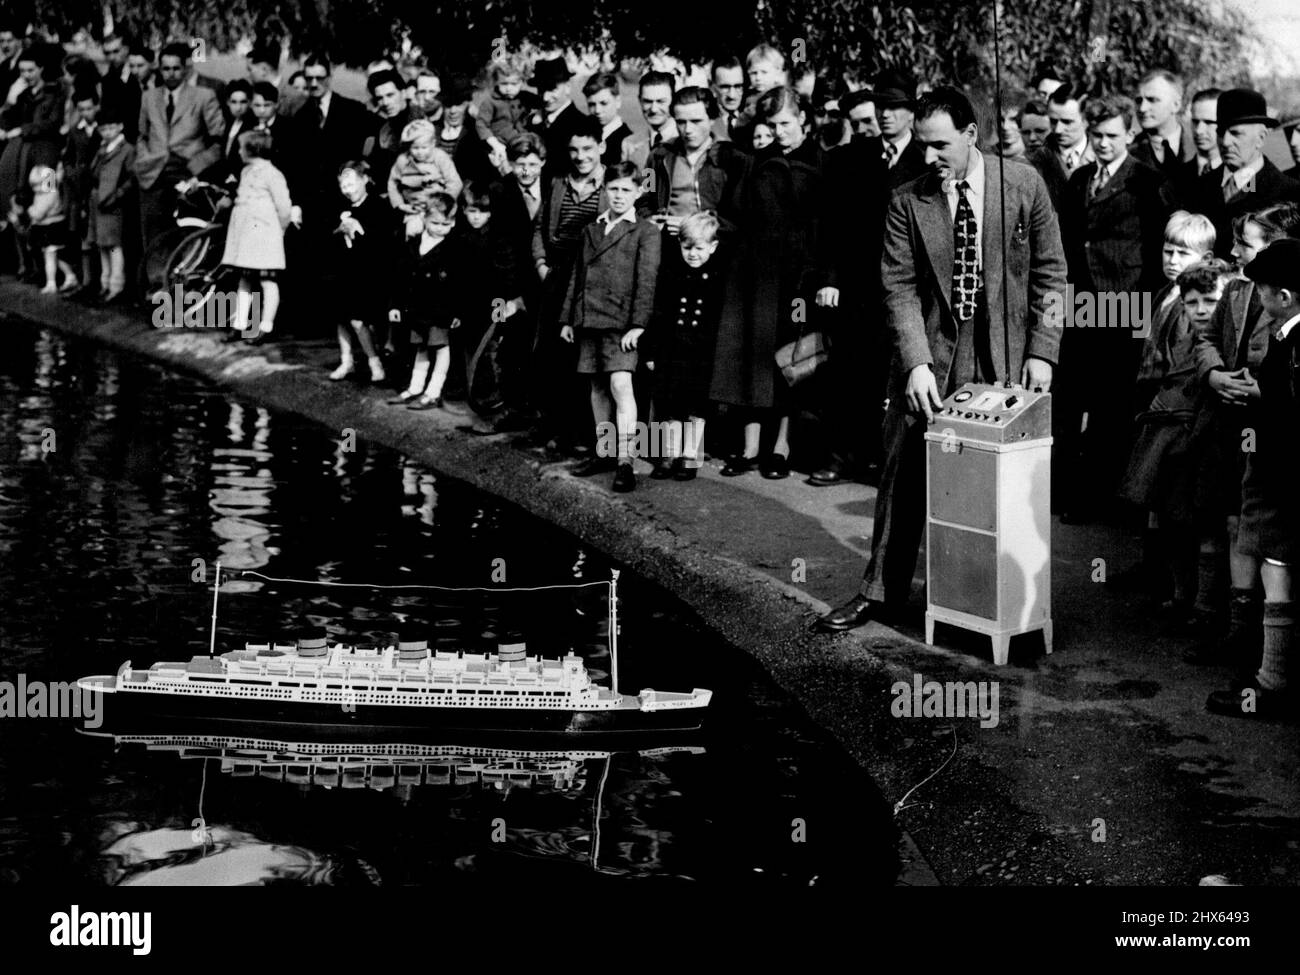 This Queen Mary Has Radio Control -- Ashore the radio controlled Queen Mary attracts a large crowd as Mr. Pyser removes the 'upper deck' at prince of Wales' pond, Blackheath. Model boat enthusiasts and pool side strollers got a surprise the other day when they saw a perfect scale model of the liner 'Queen Mary' ploughing steadily across the 'Ocean' of prince of Wales Pond, Blackheath. The ship turned, went astern and even hove to off shore, with only the radio antennae to give a clus as to how i Stock Photo